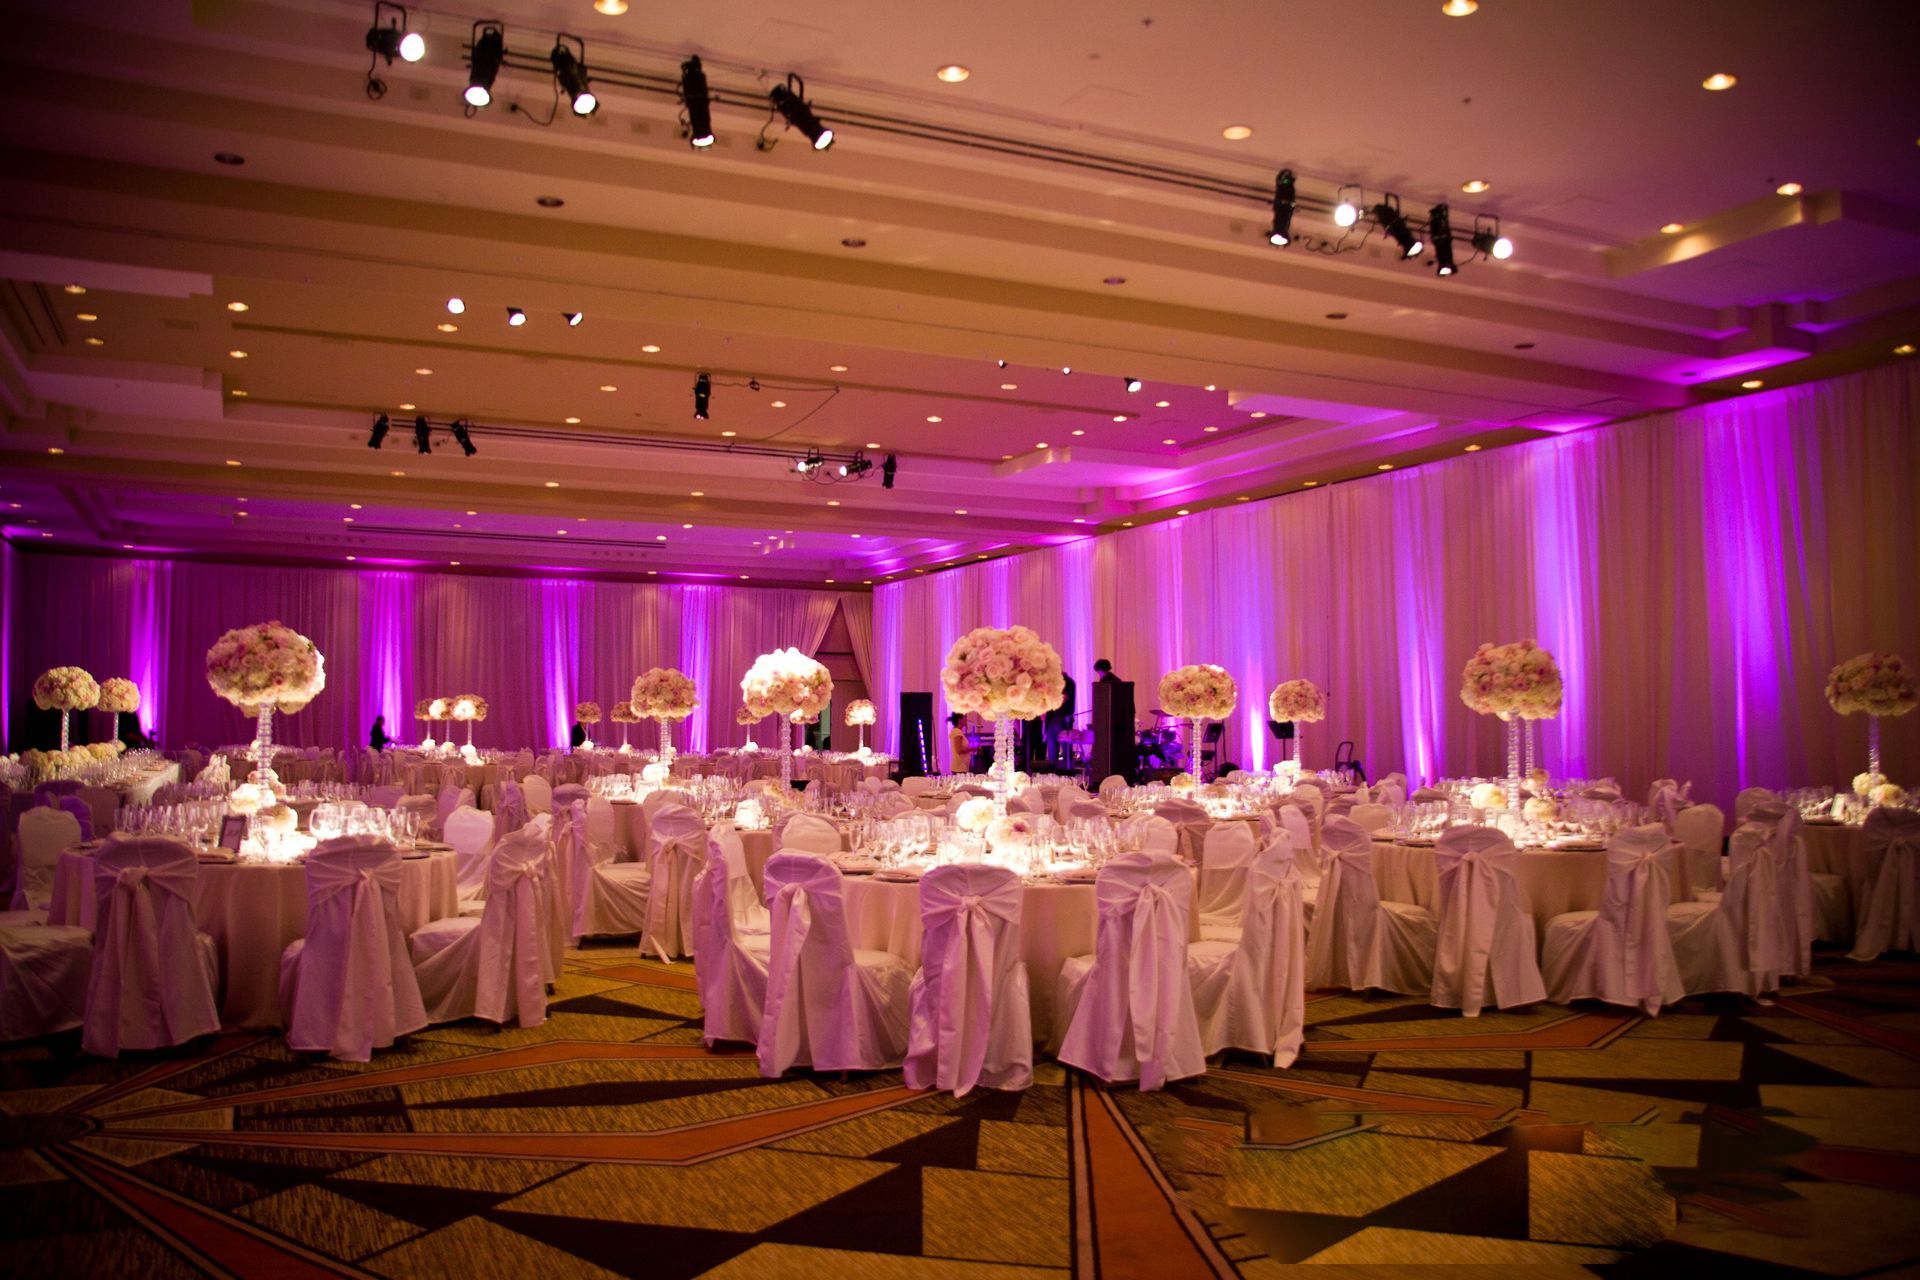 A large room with tables and chairs set up for a wedding reception.